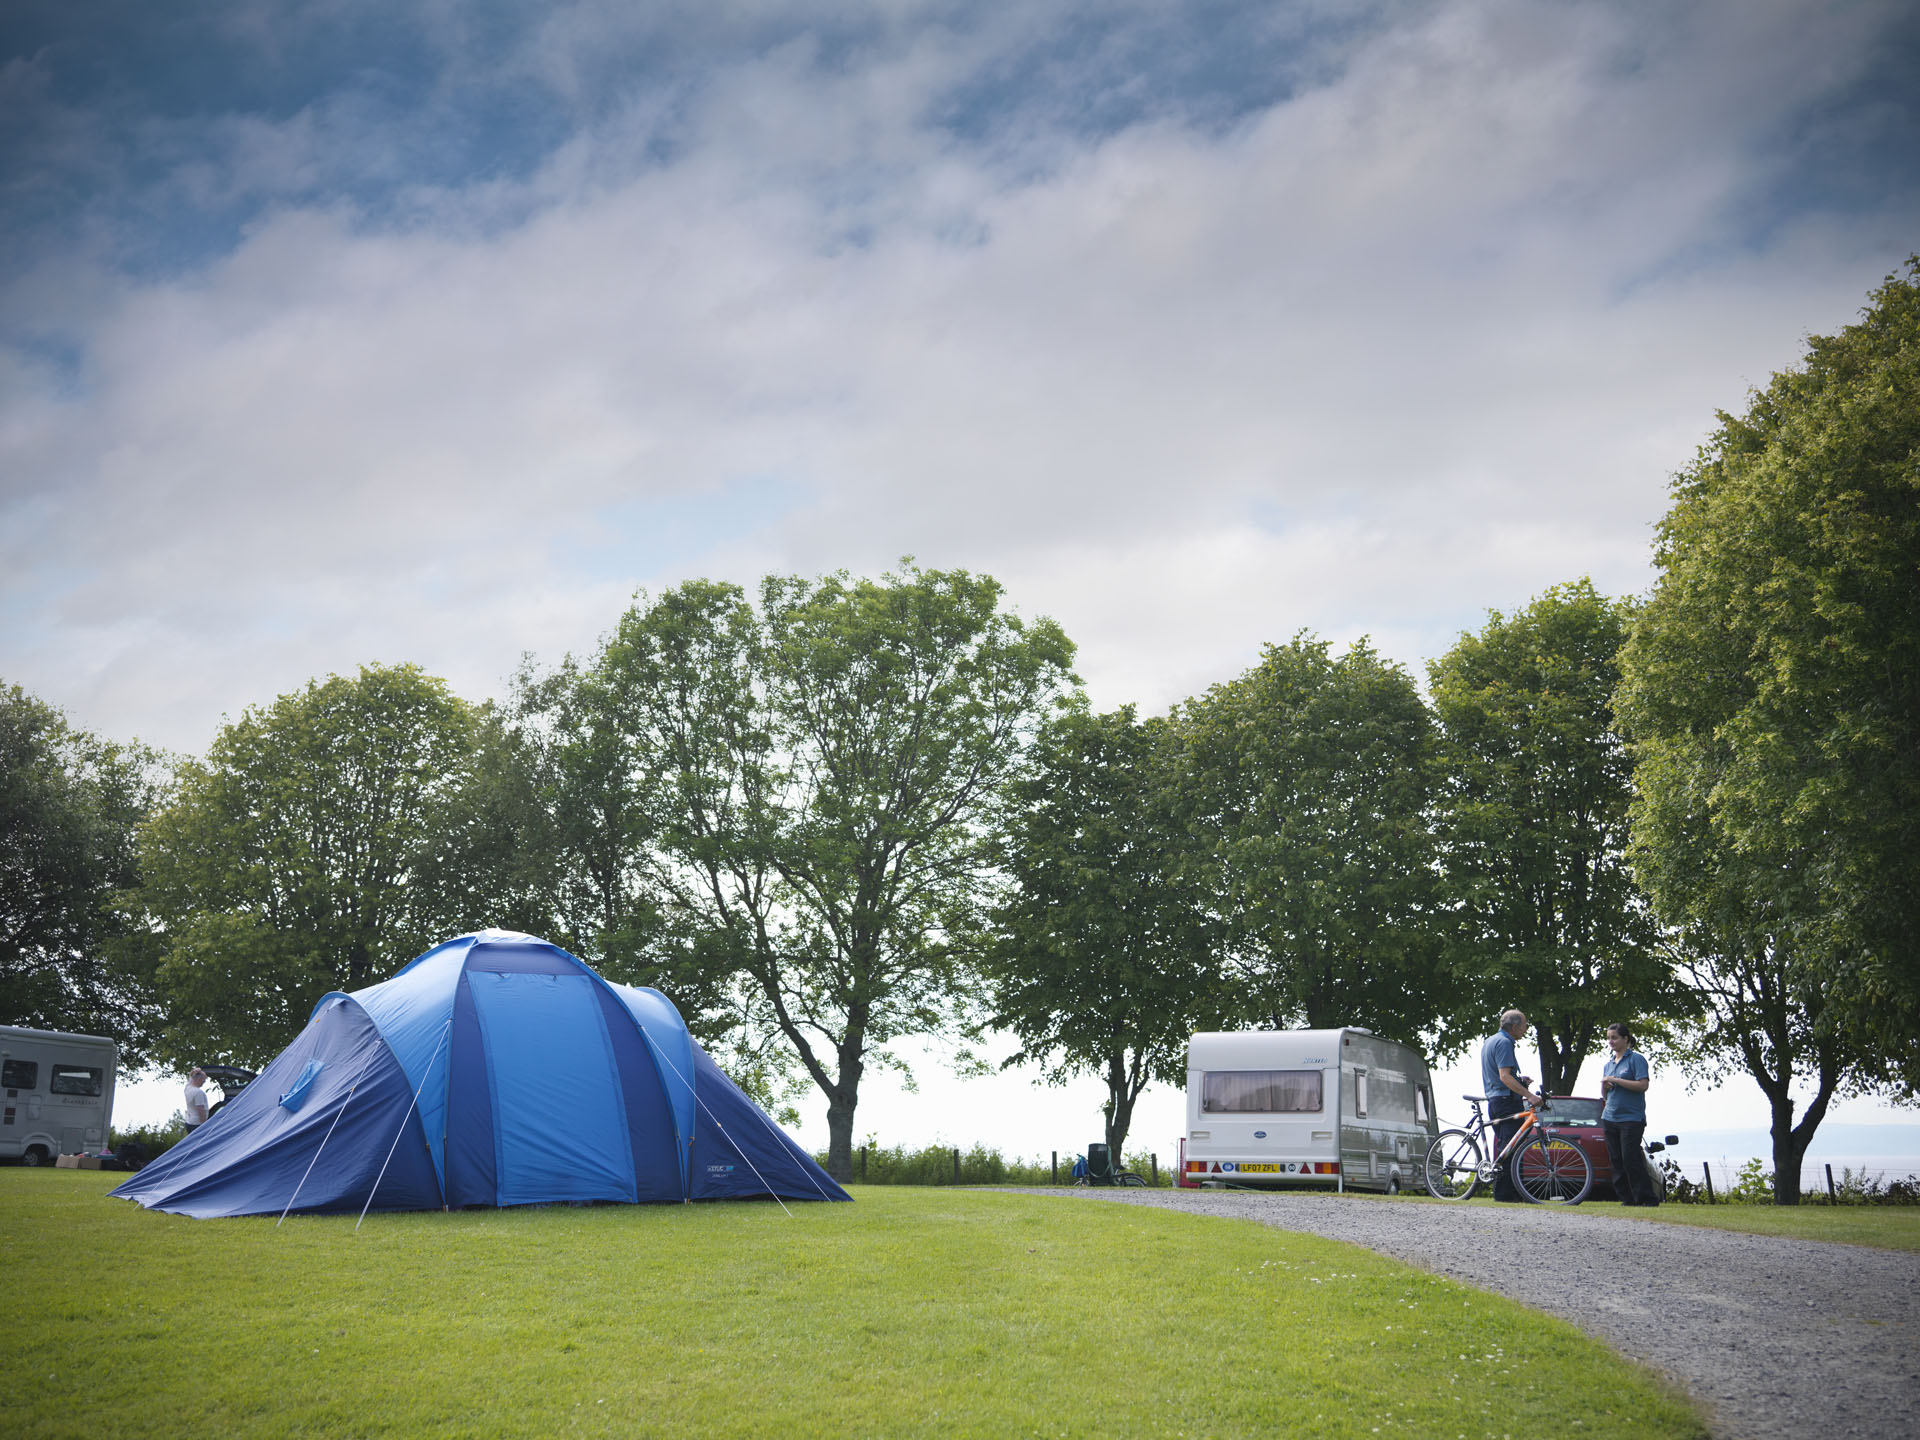 Culzean Castle - Camping and Caravanning Club Site - The Camping and